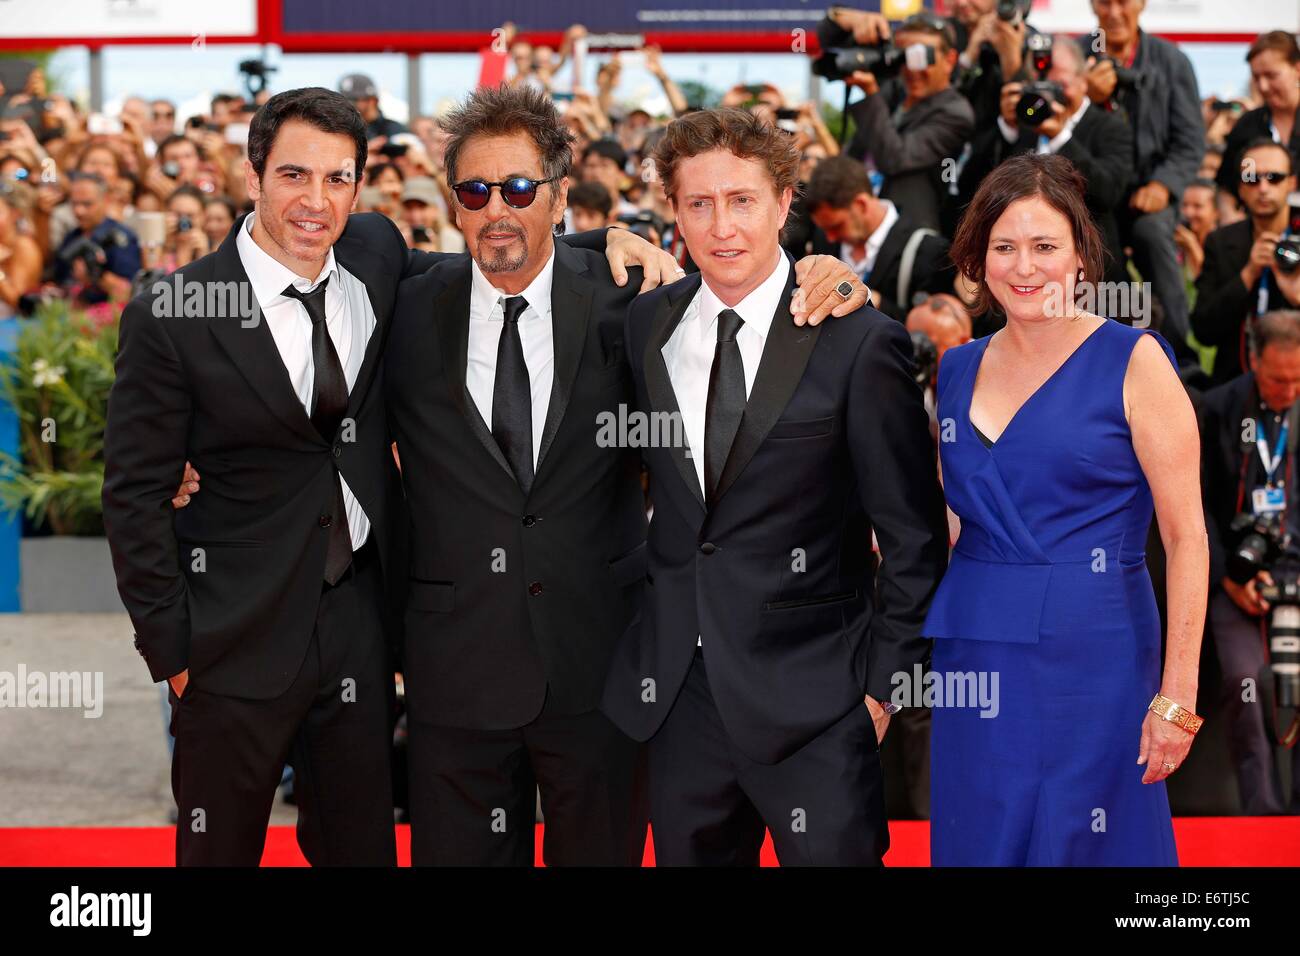 Venice, Italy. 30th Aug, 2014. CHRIS MESSINA, DAVID GORDON GREEN, AL PACINO and LISA MUSKAT arrive for the premiere of 'Manglehorn' at the 71st Venice International Film Festival at the Lido in Venice, Italy. The movie is presented in the official competition at the festival that runs from 27 August to 6 September. Credit:  Roger Harvey/Globe Photos/ZUMA Wire/Alamy Live News Stock Photo